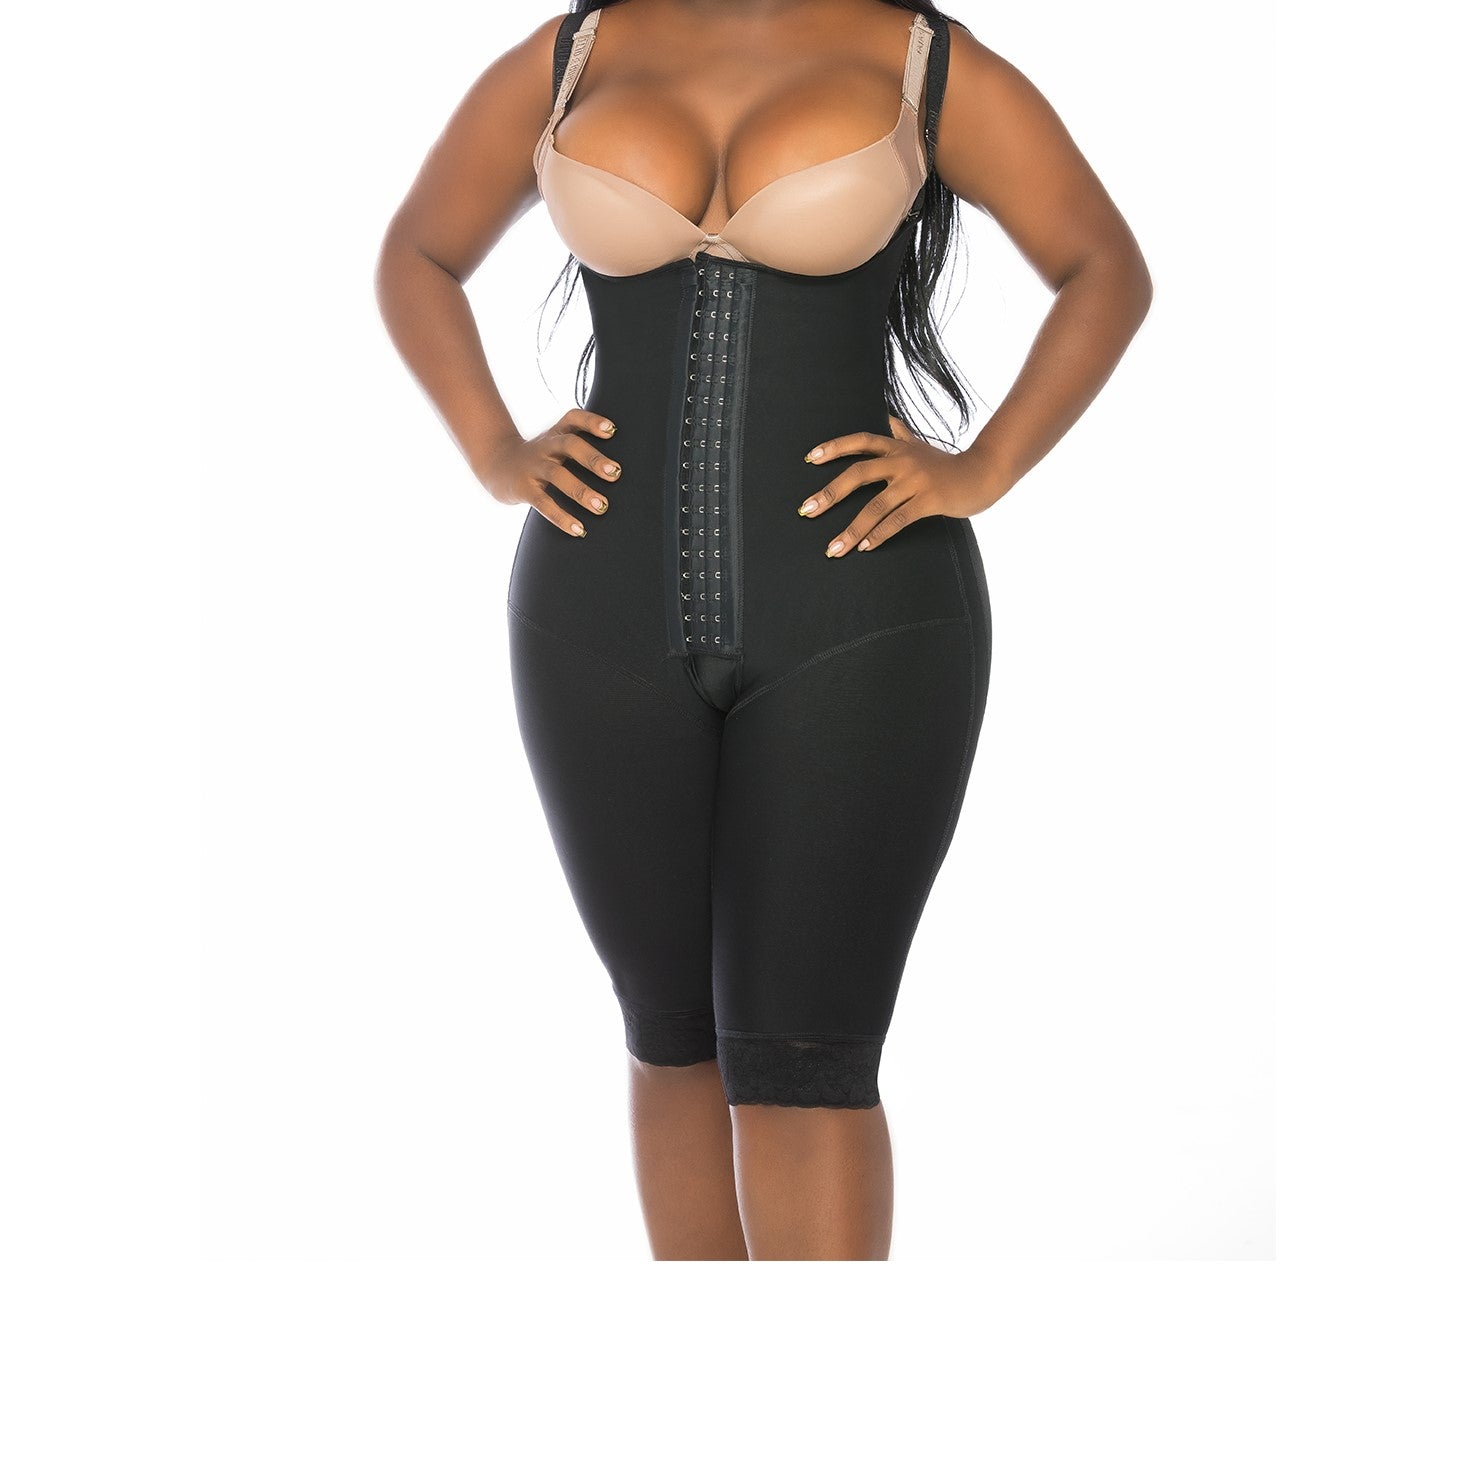 Stage 1 Compression Faja with adjustable straps #1252